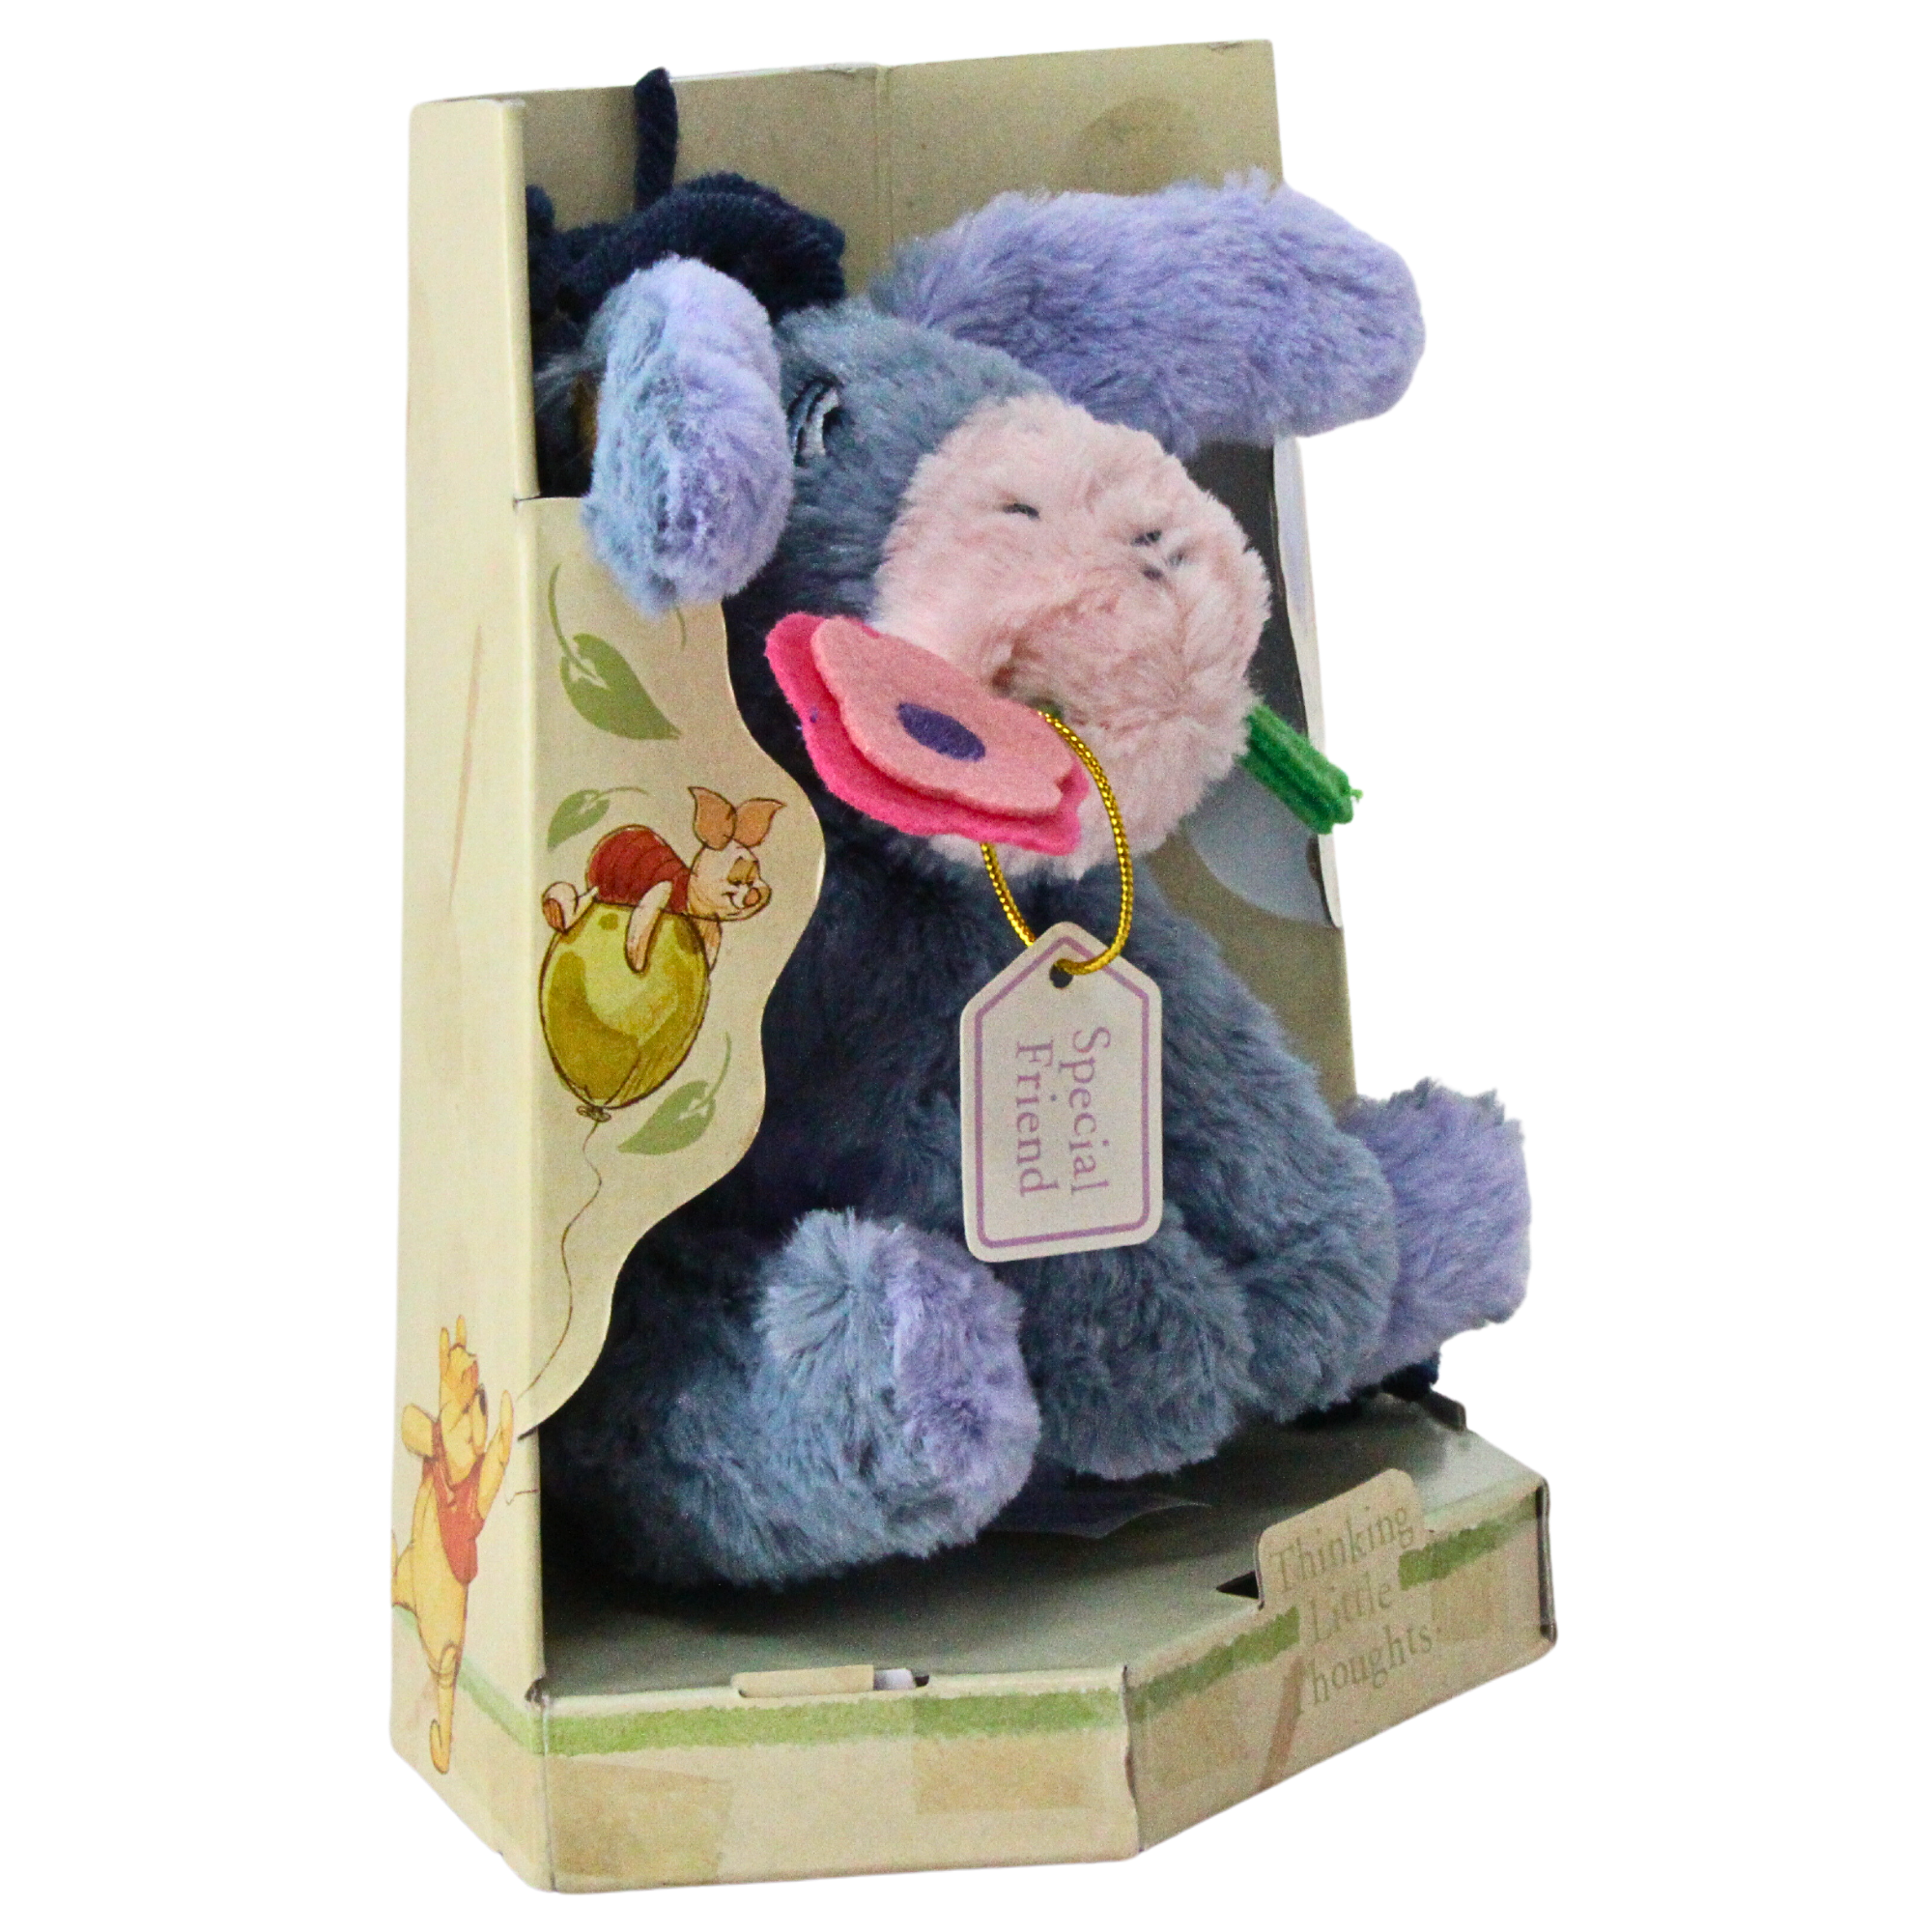 Disney - Winnie The Pooh 8" Soft Toy With Special Friend Flower - Thinking Little Thoughts - Toptoys2u